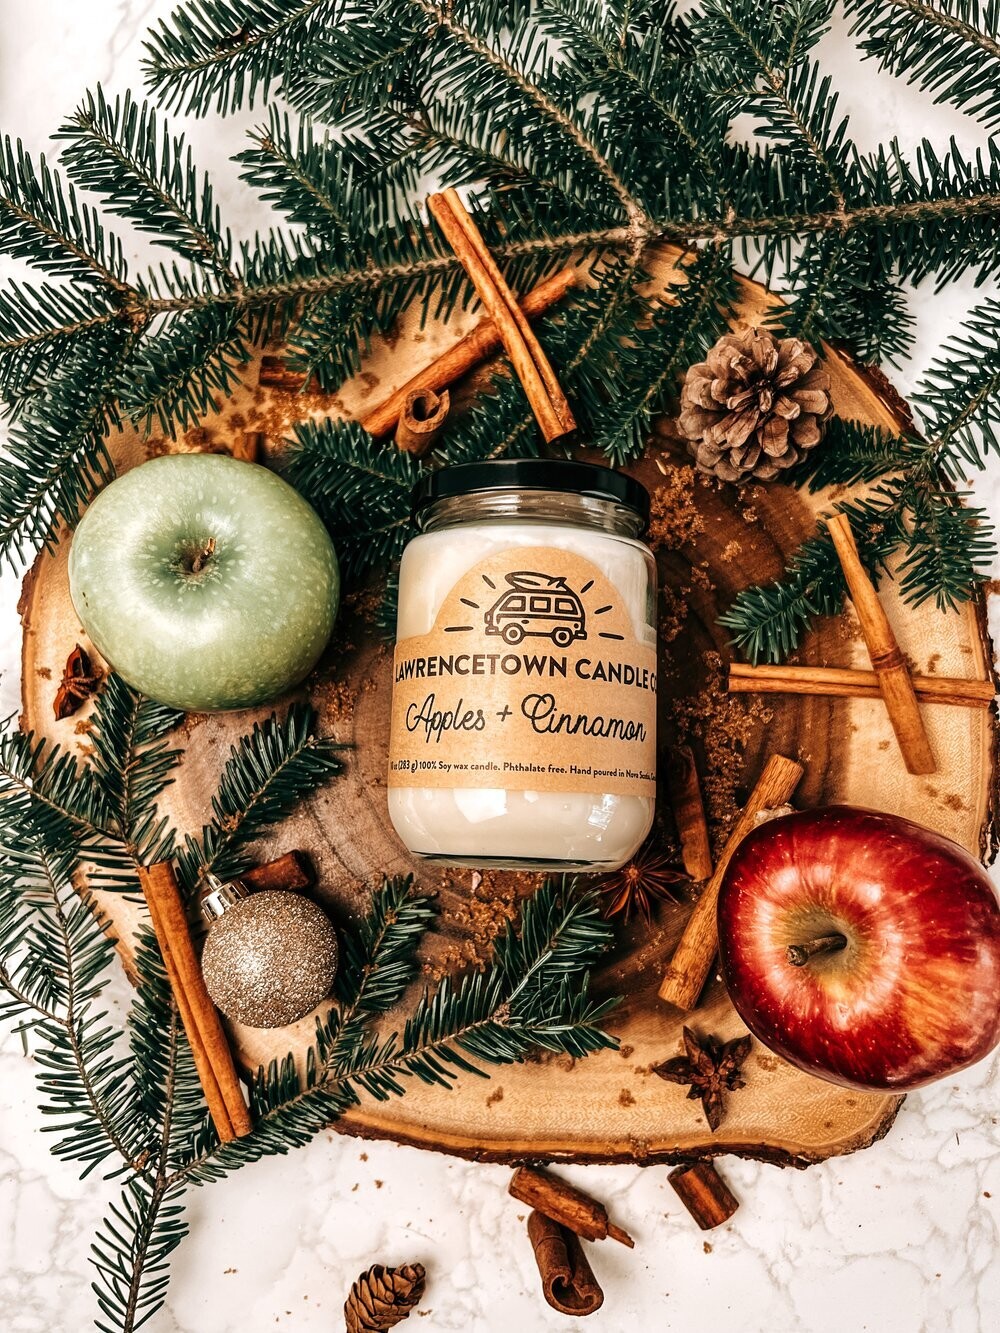 Apples & Cinnamon 10oz Candle - Lawrencetown Candle Co